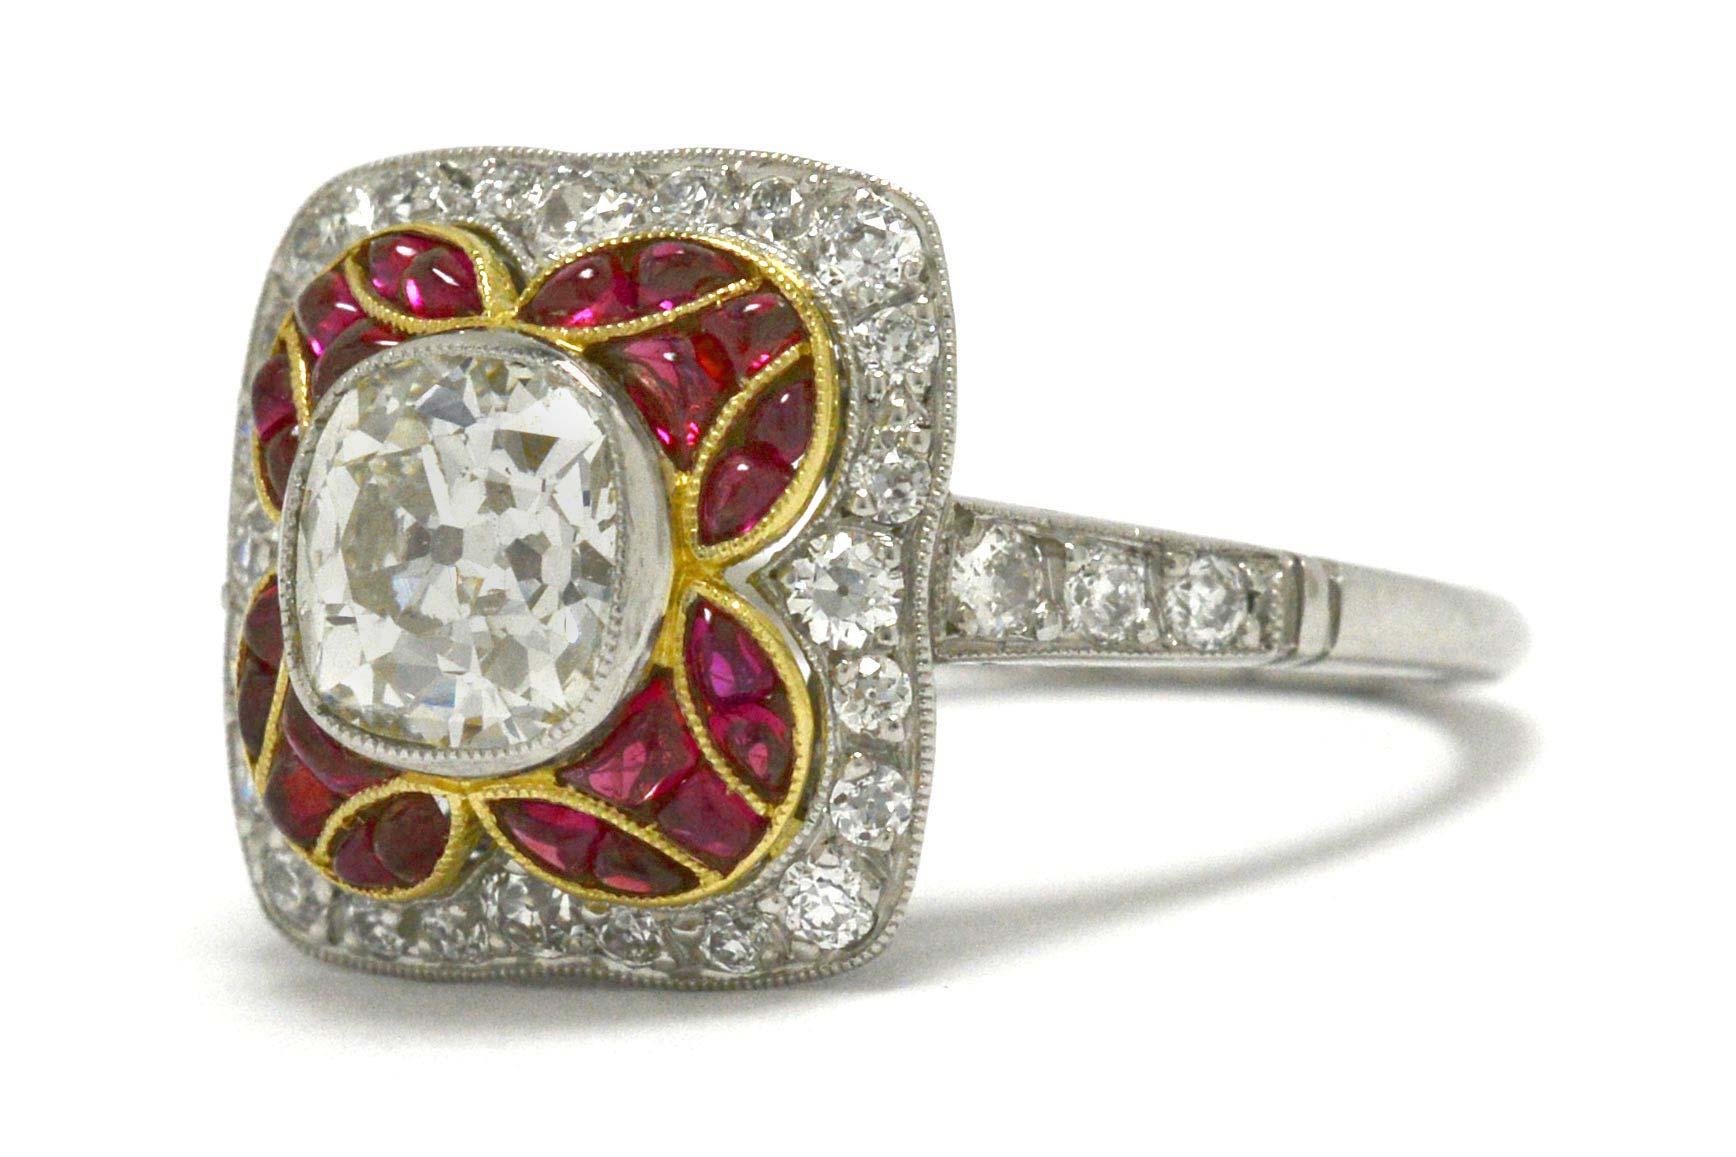 Women's Old Mine Cut Diamond & Ruby Cocktail Ring Engagement Antique Mosaic Bombe' Dome